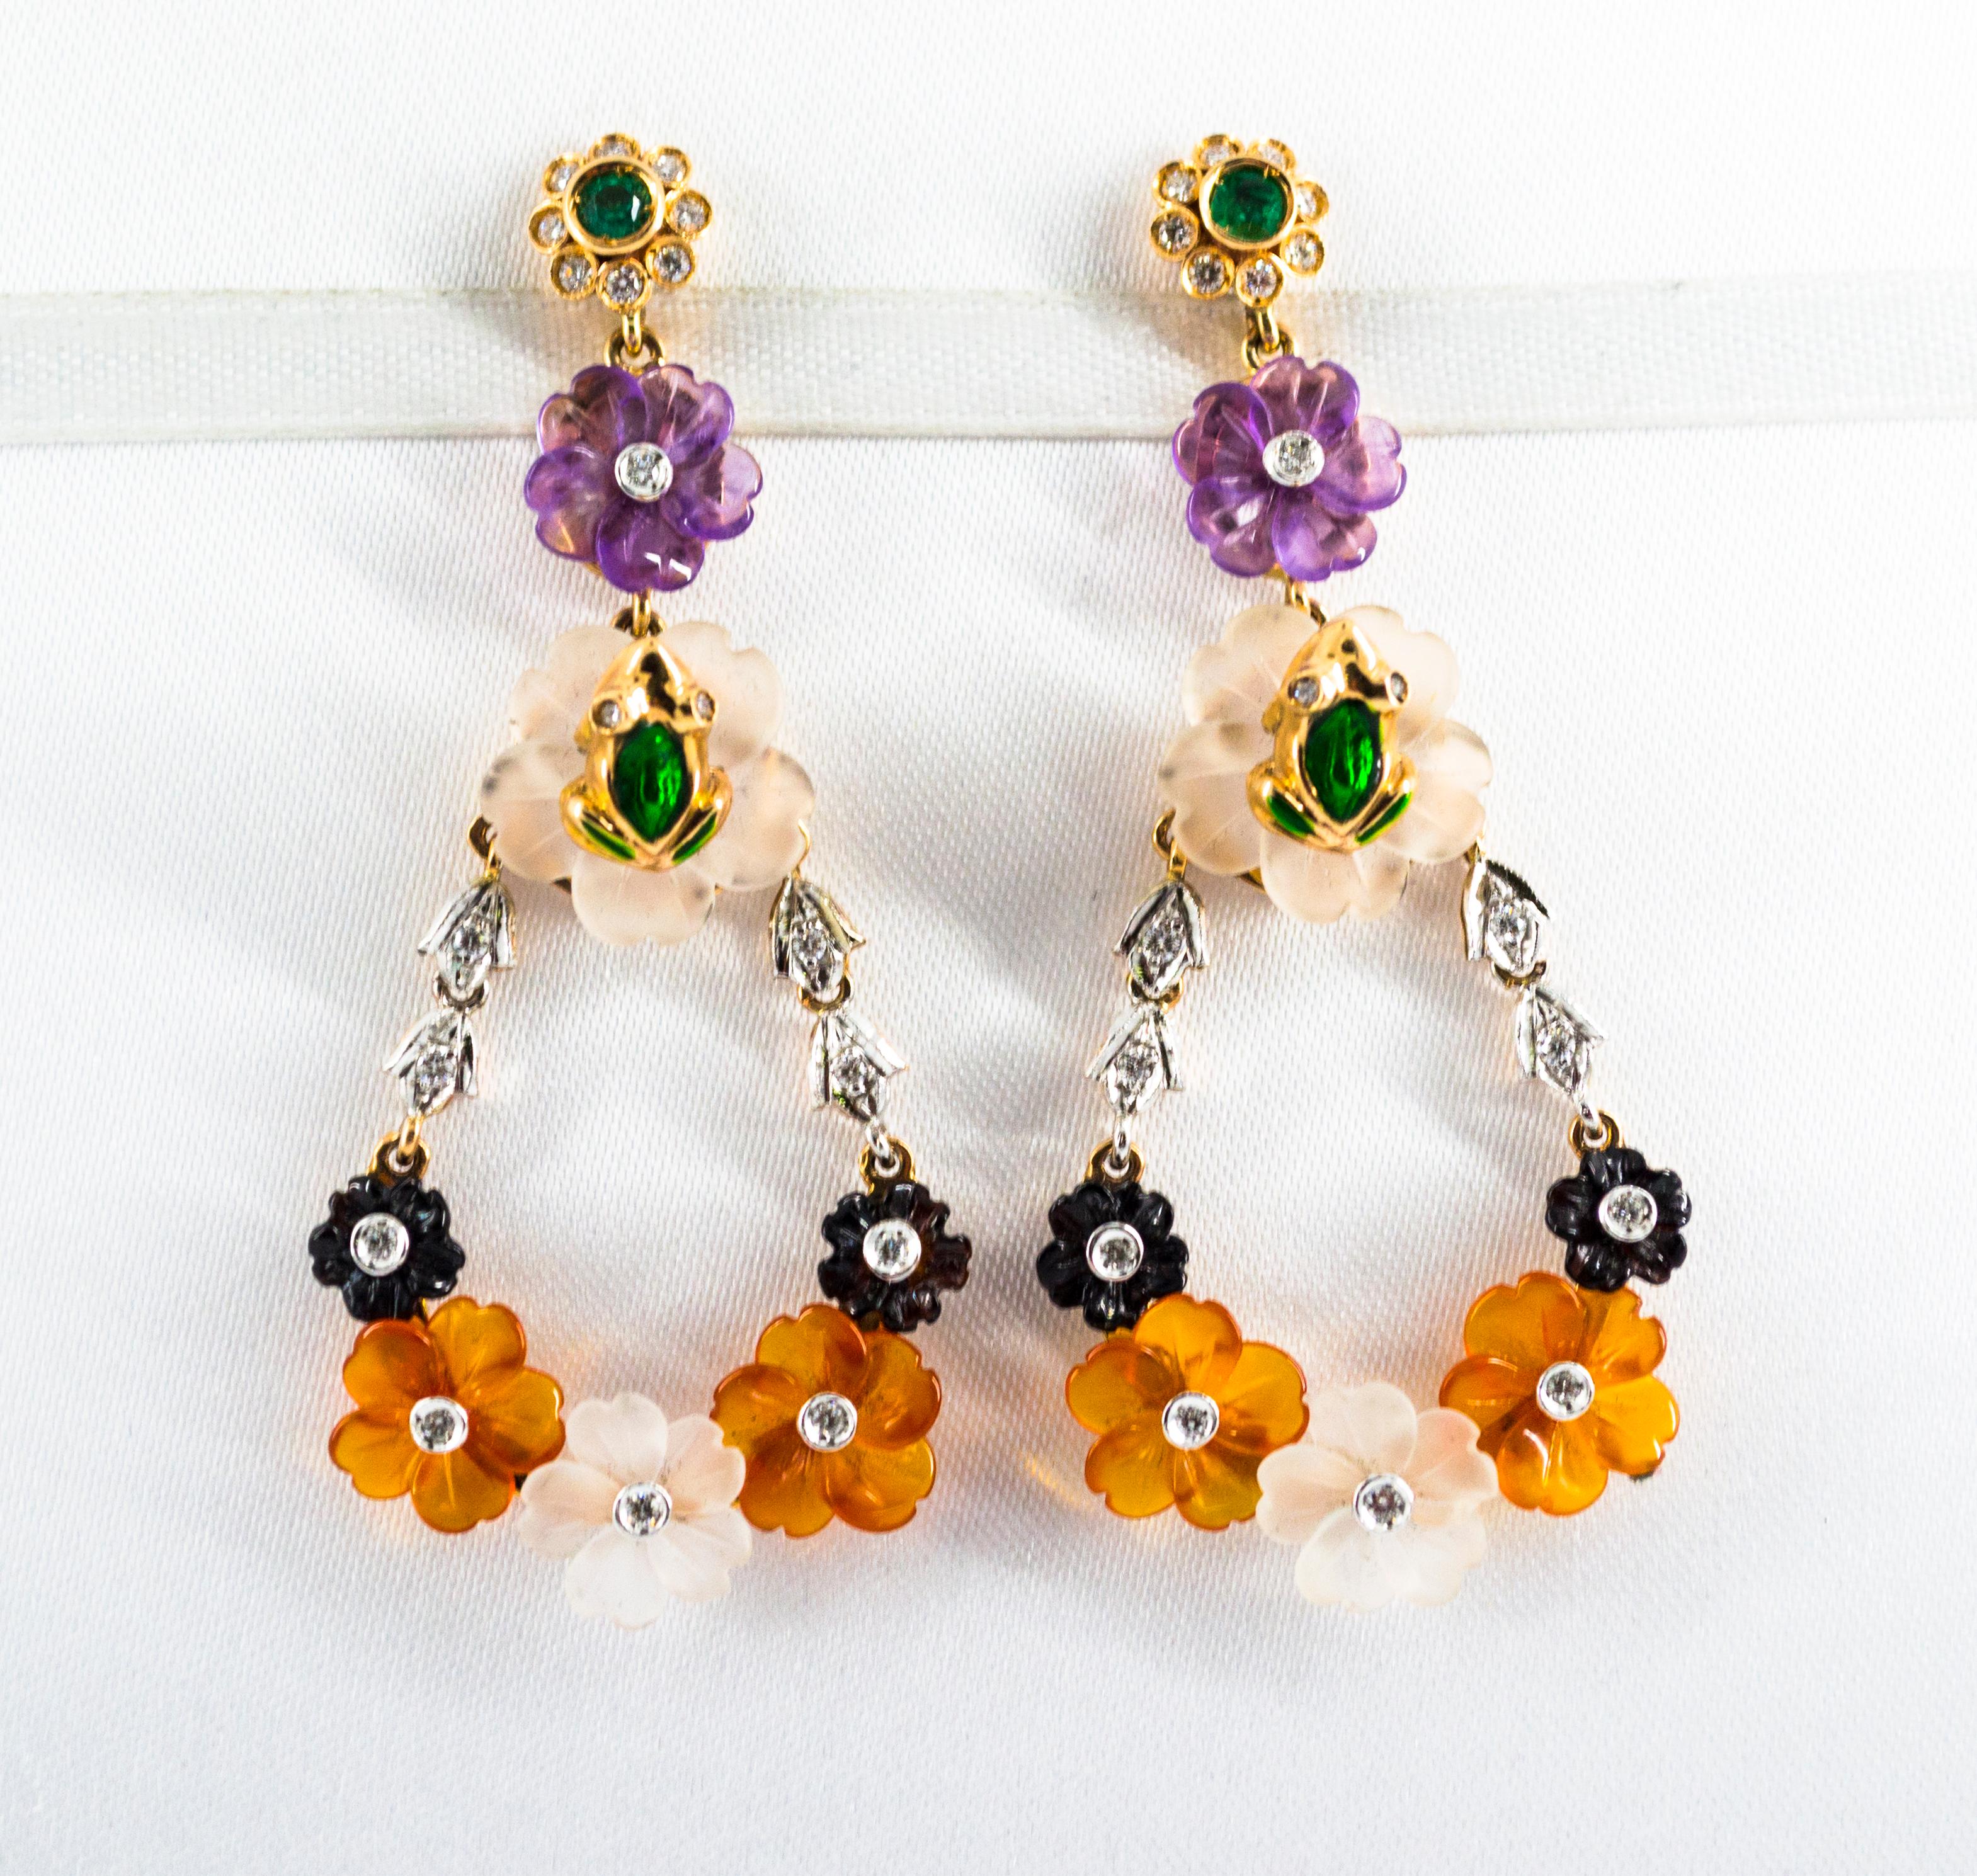 These Earrings are made of 14K Yellow Gold and White Gold.
These Earrings have 0.50 Carats of White Brilliant Cut Diamonds.
These Earrings have 0.20 Carats of Emeralds.
These Earrings have also Agate, Rock Crystal, Amethyst, Carnelian and